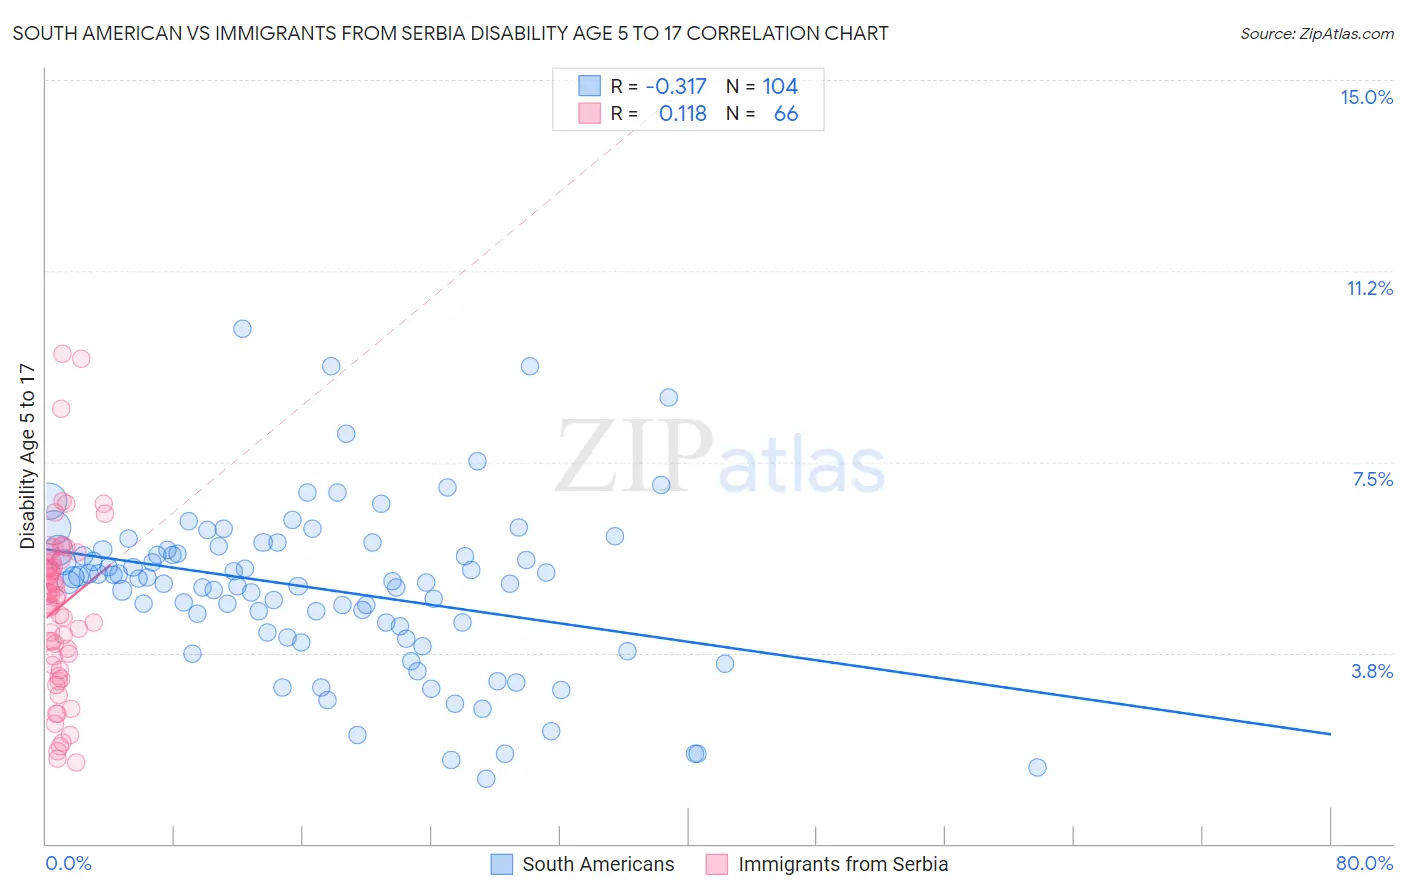 South American vs Immigrants from Serbia Disability Age 5 to 17